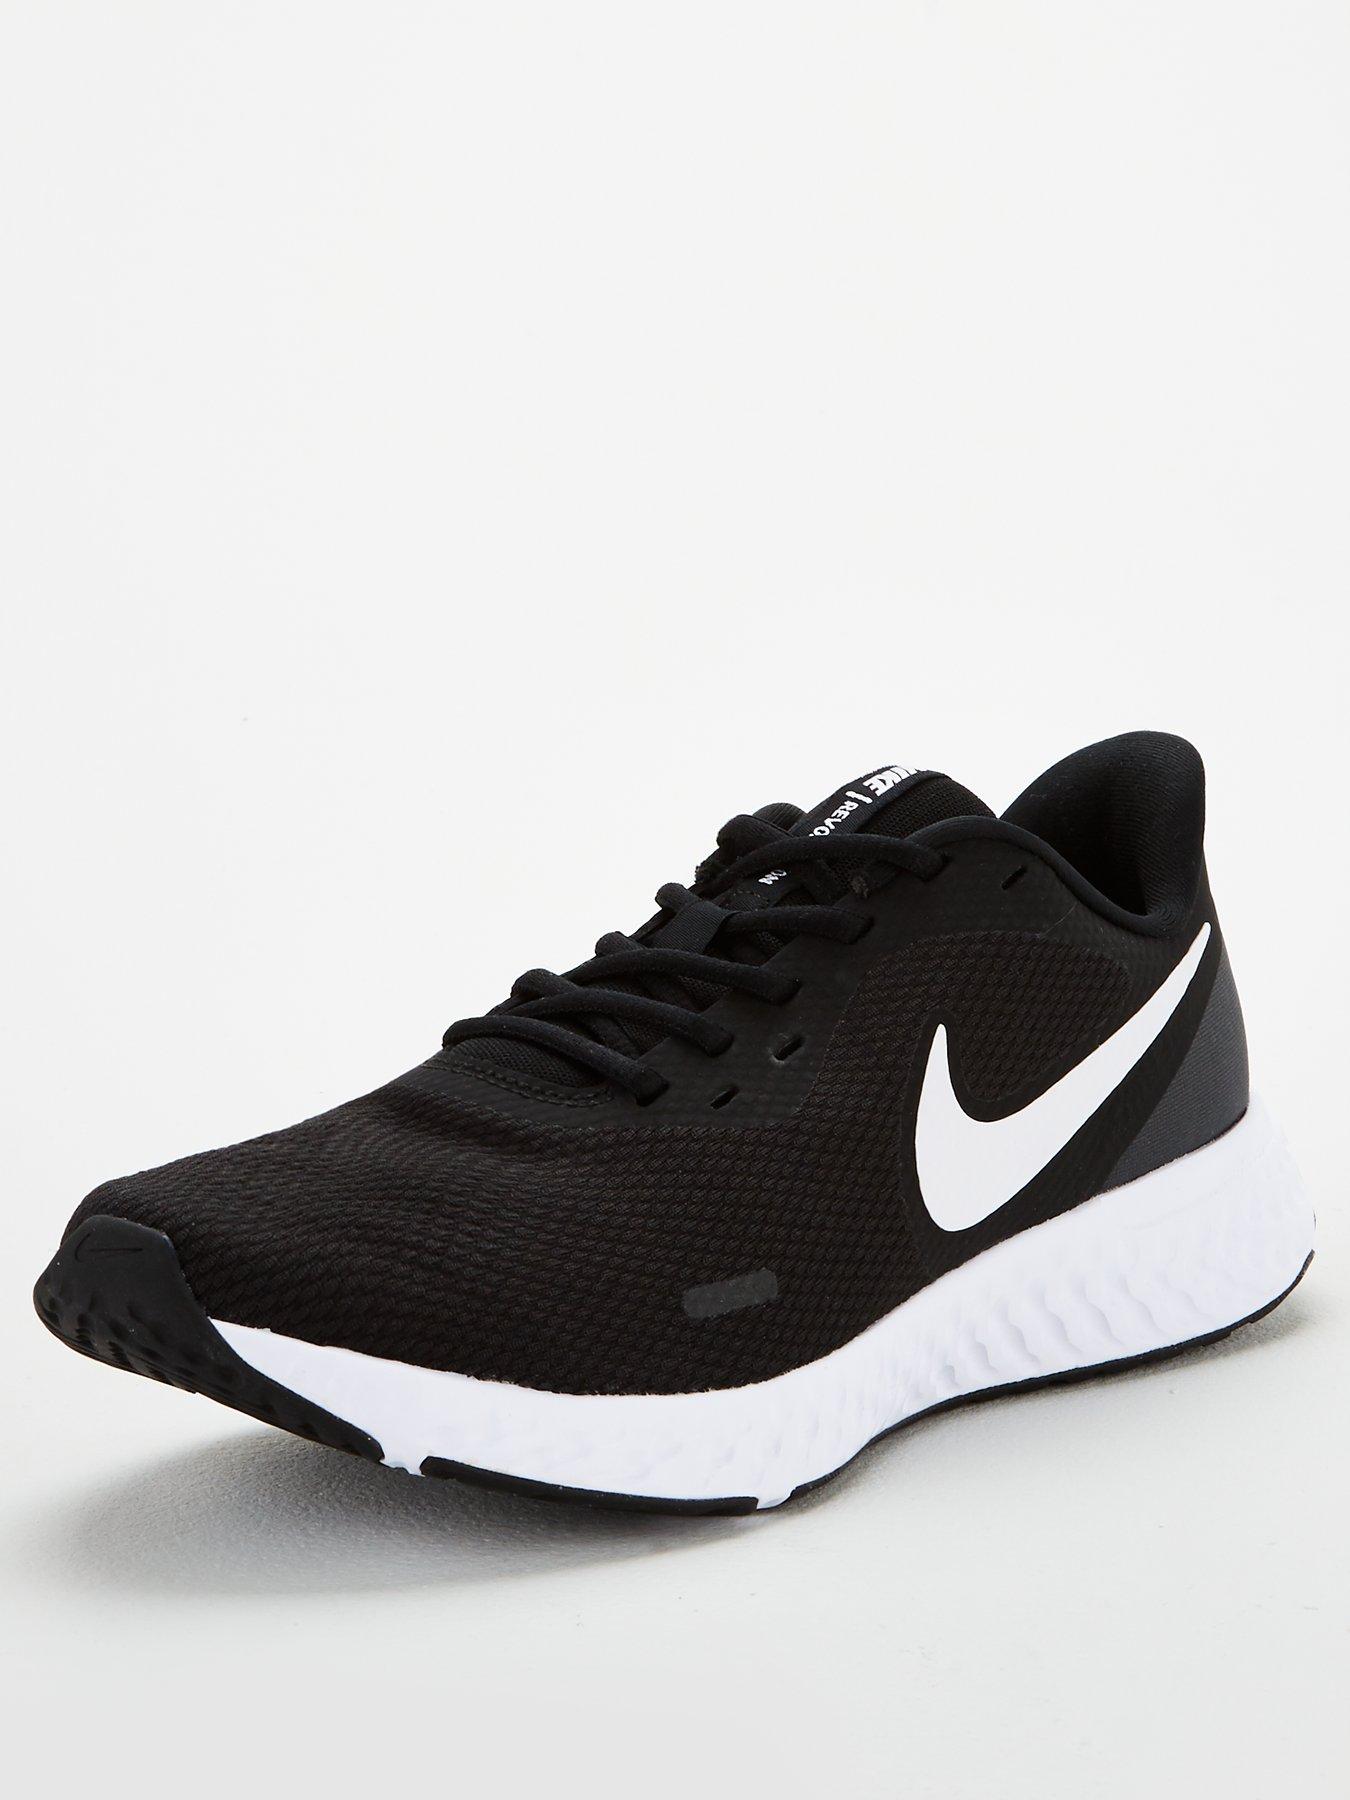 Mens trainers | Mens sports shoes 